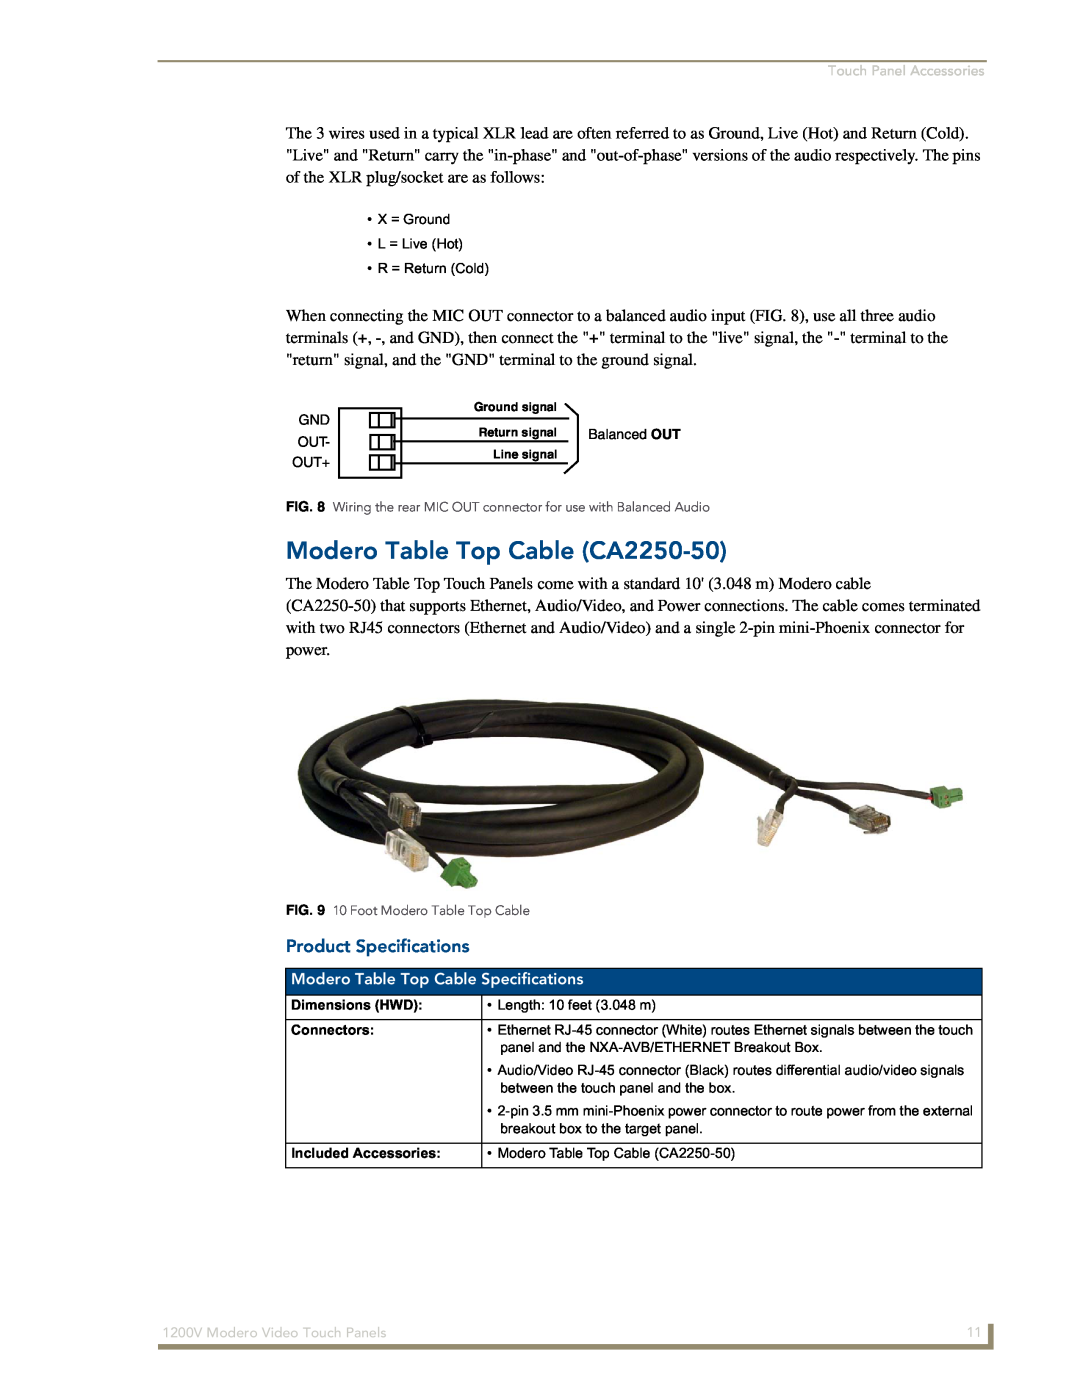 AMX NXT-1200V manual Modero Table Top Cable CA2250-50, Product Specifications, Modero Table Top Cable Specifications 